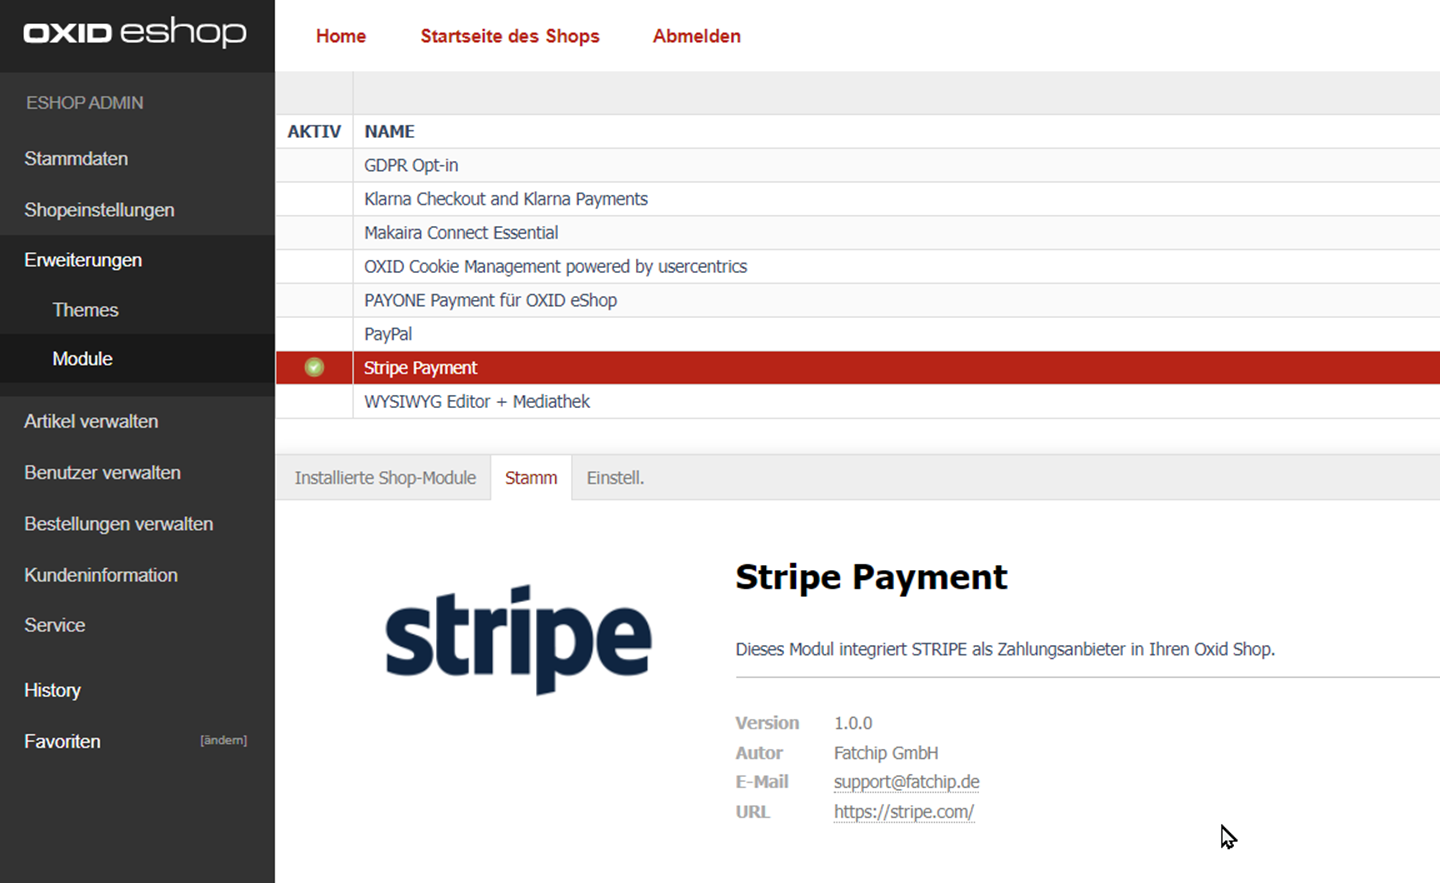 Stripe for OXID successfully installed